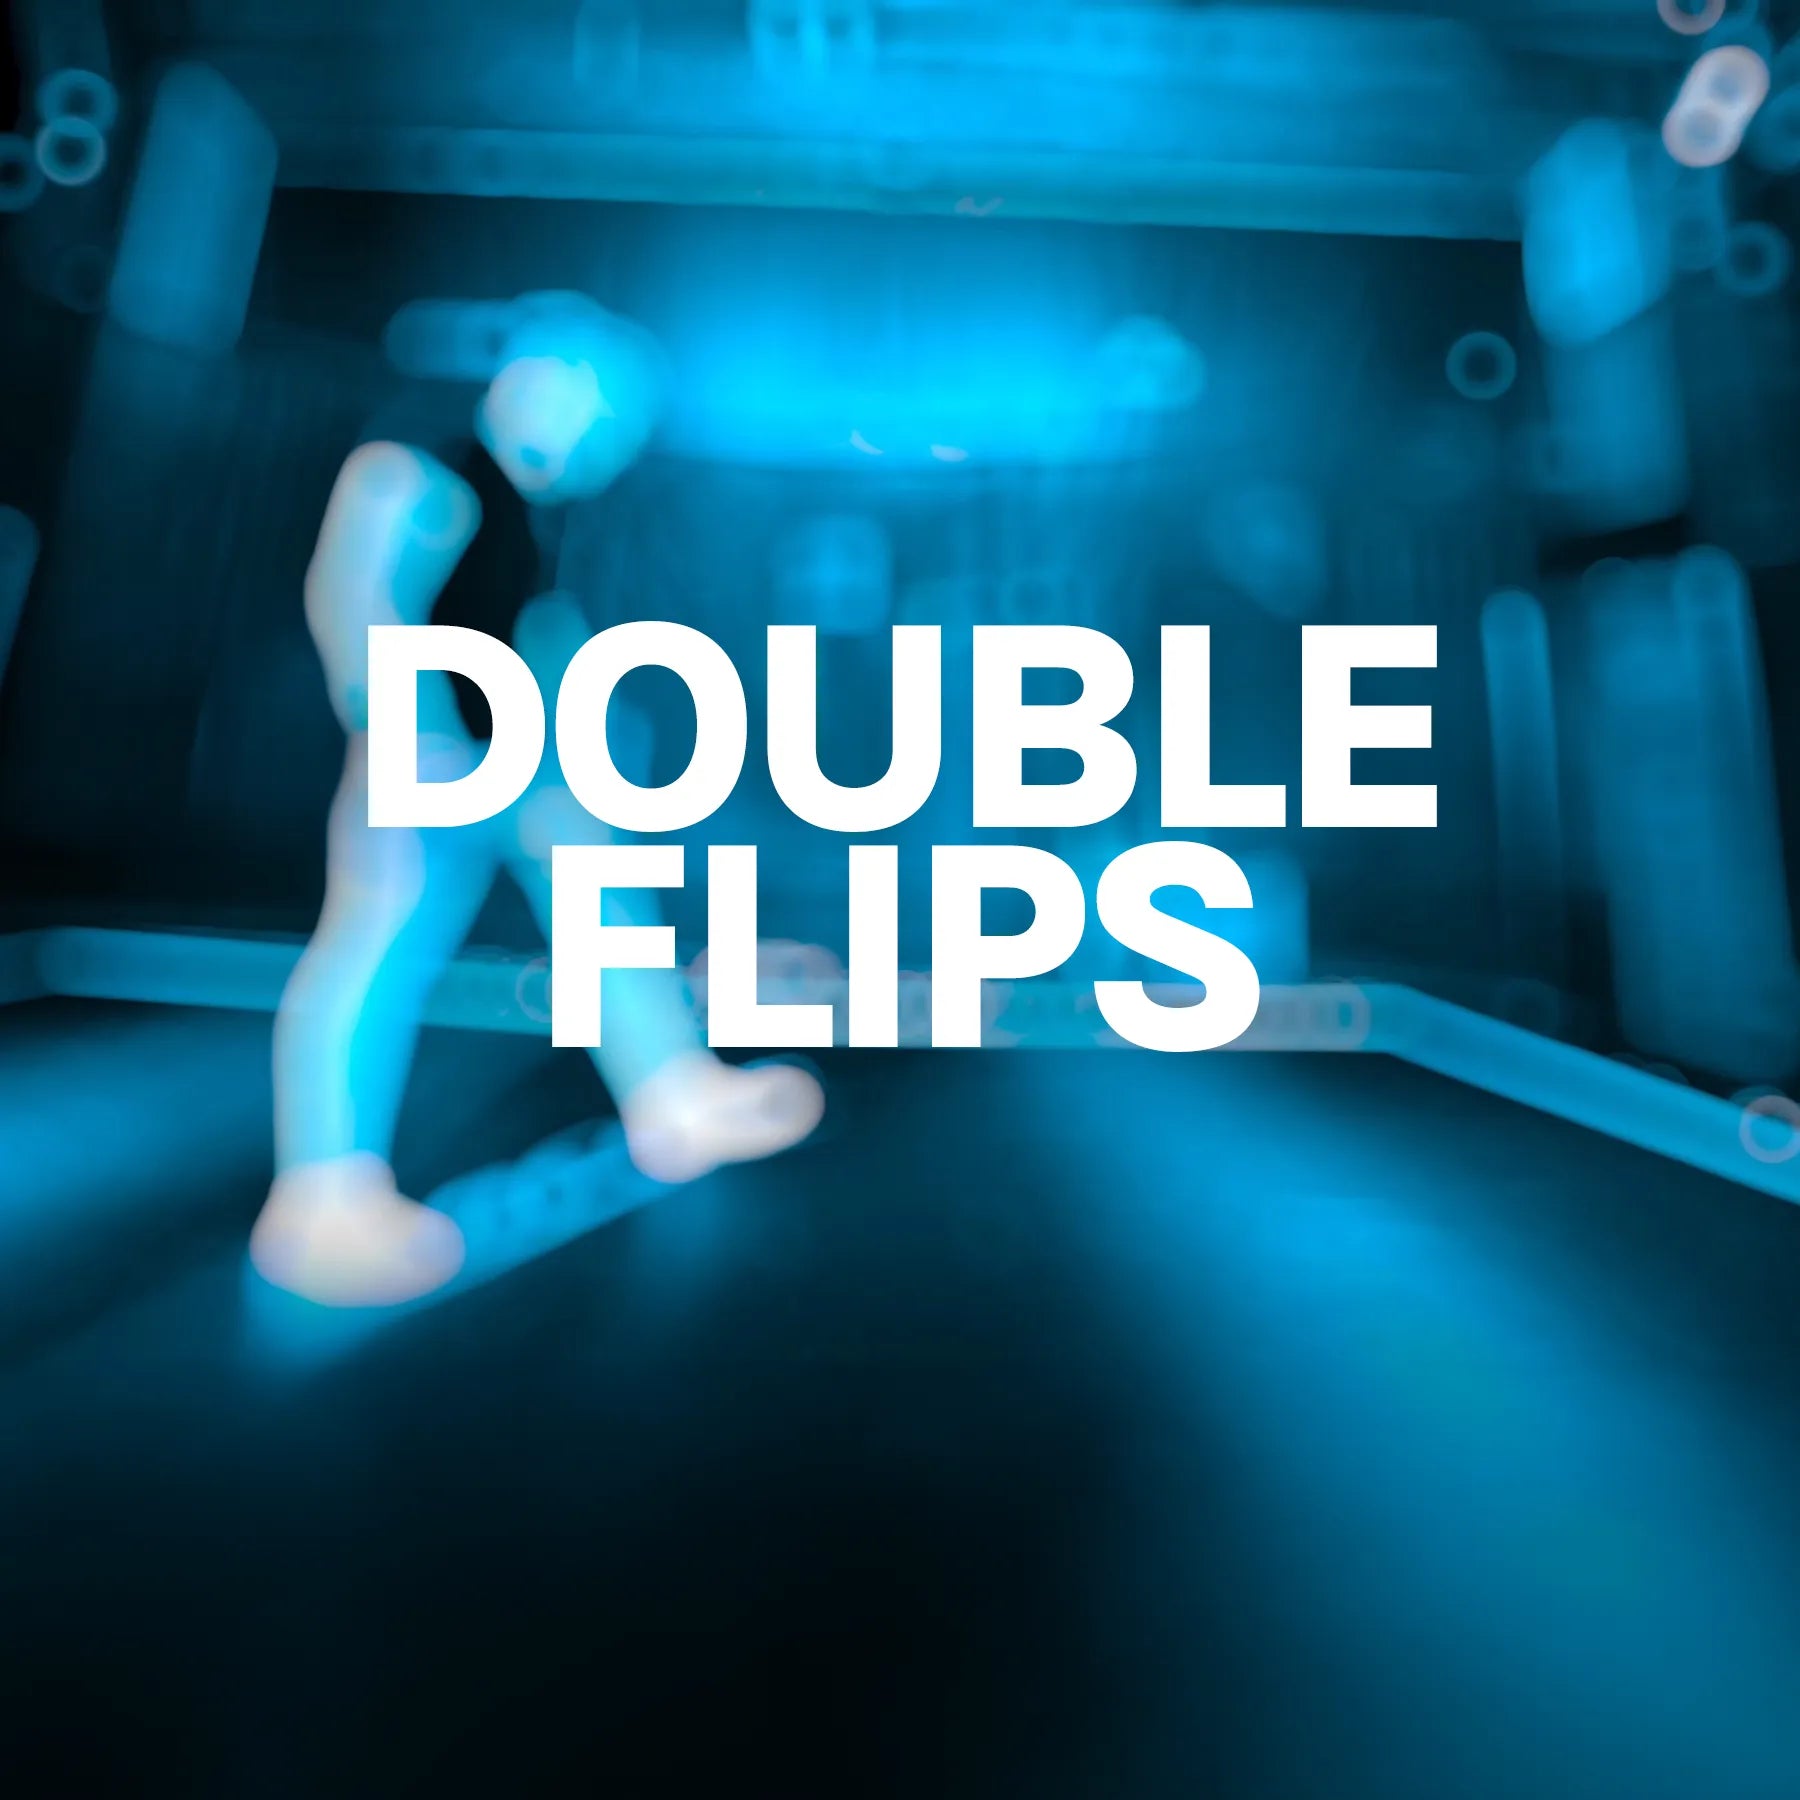 Placeholder image for the Double Flips Trampoline Trick.